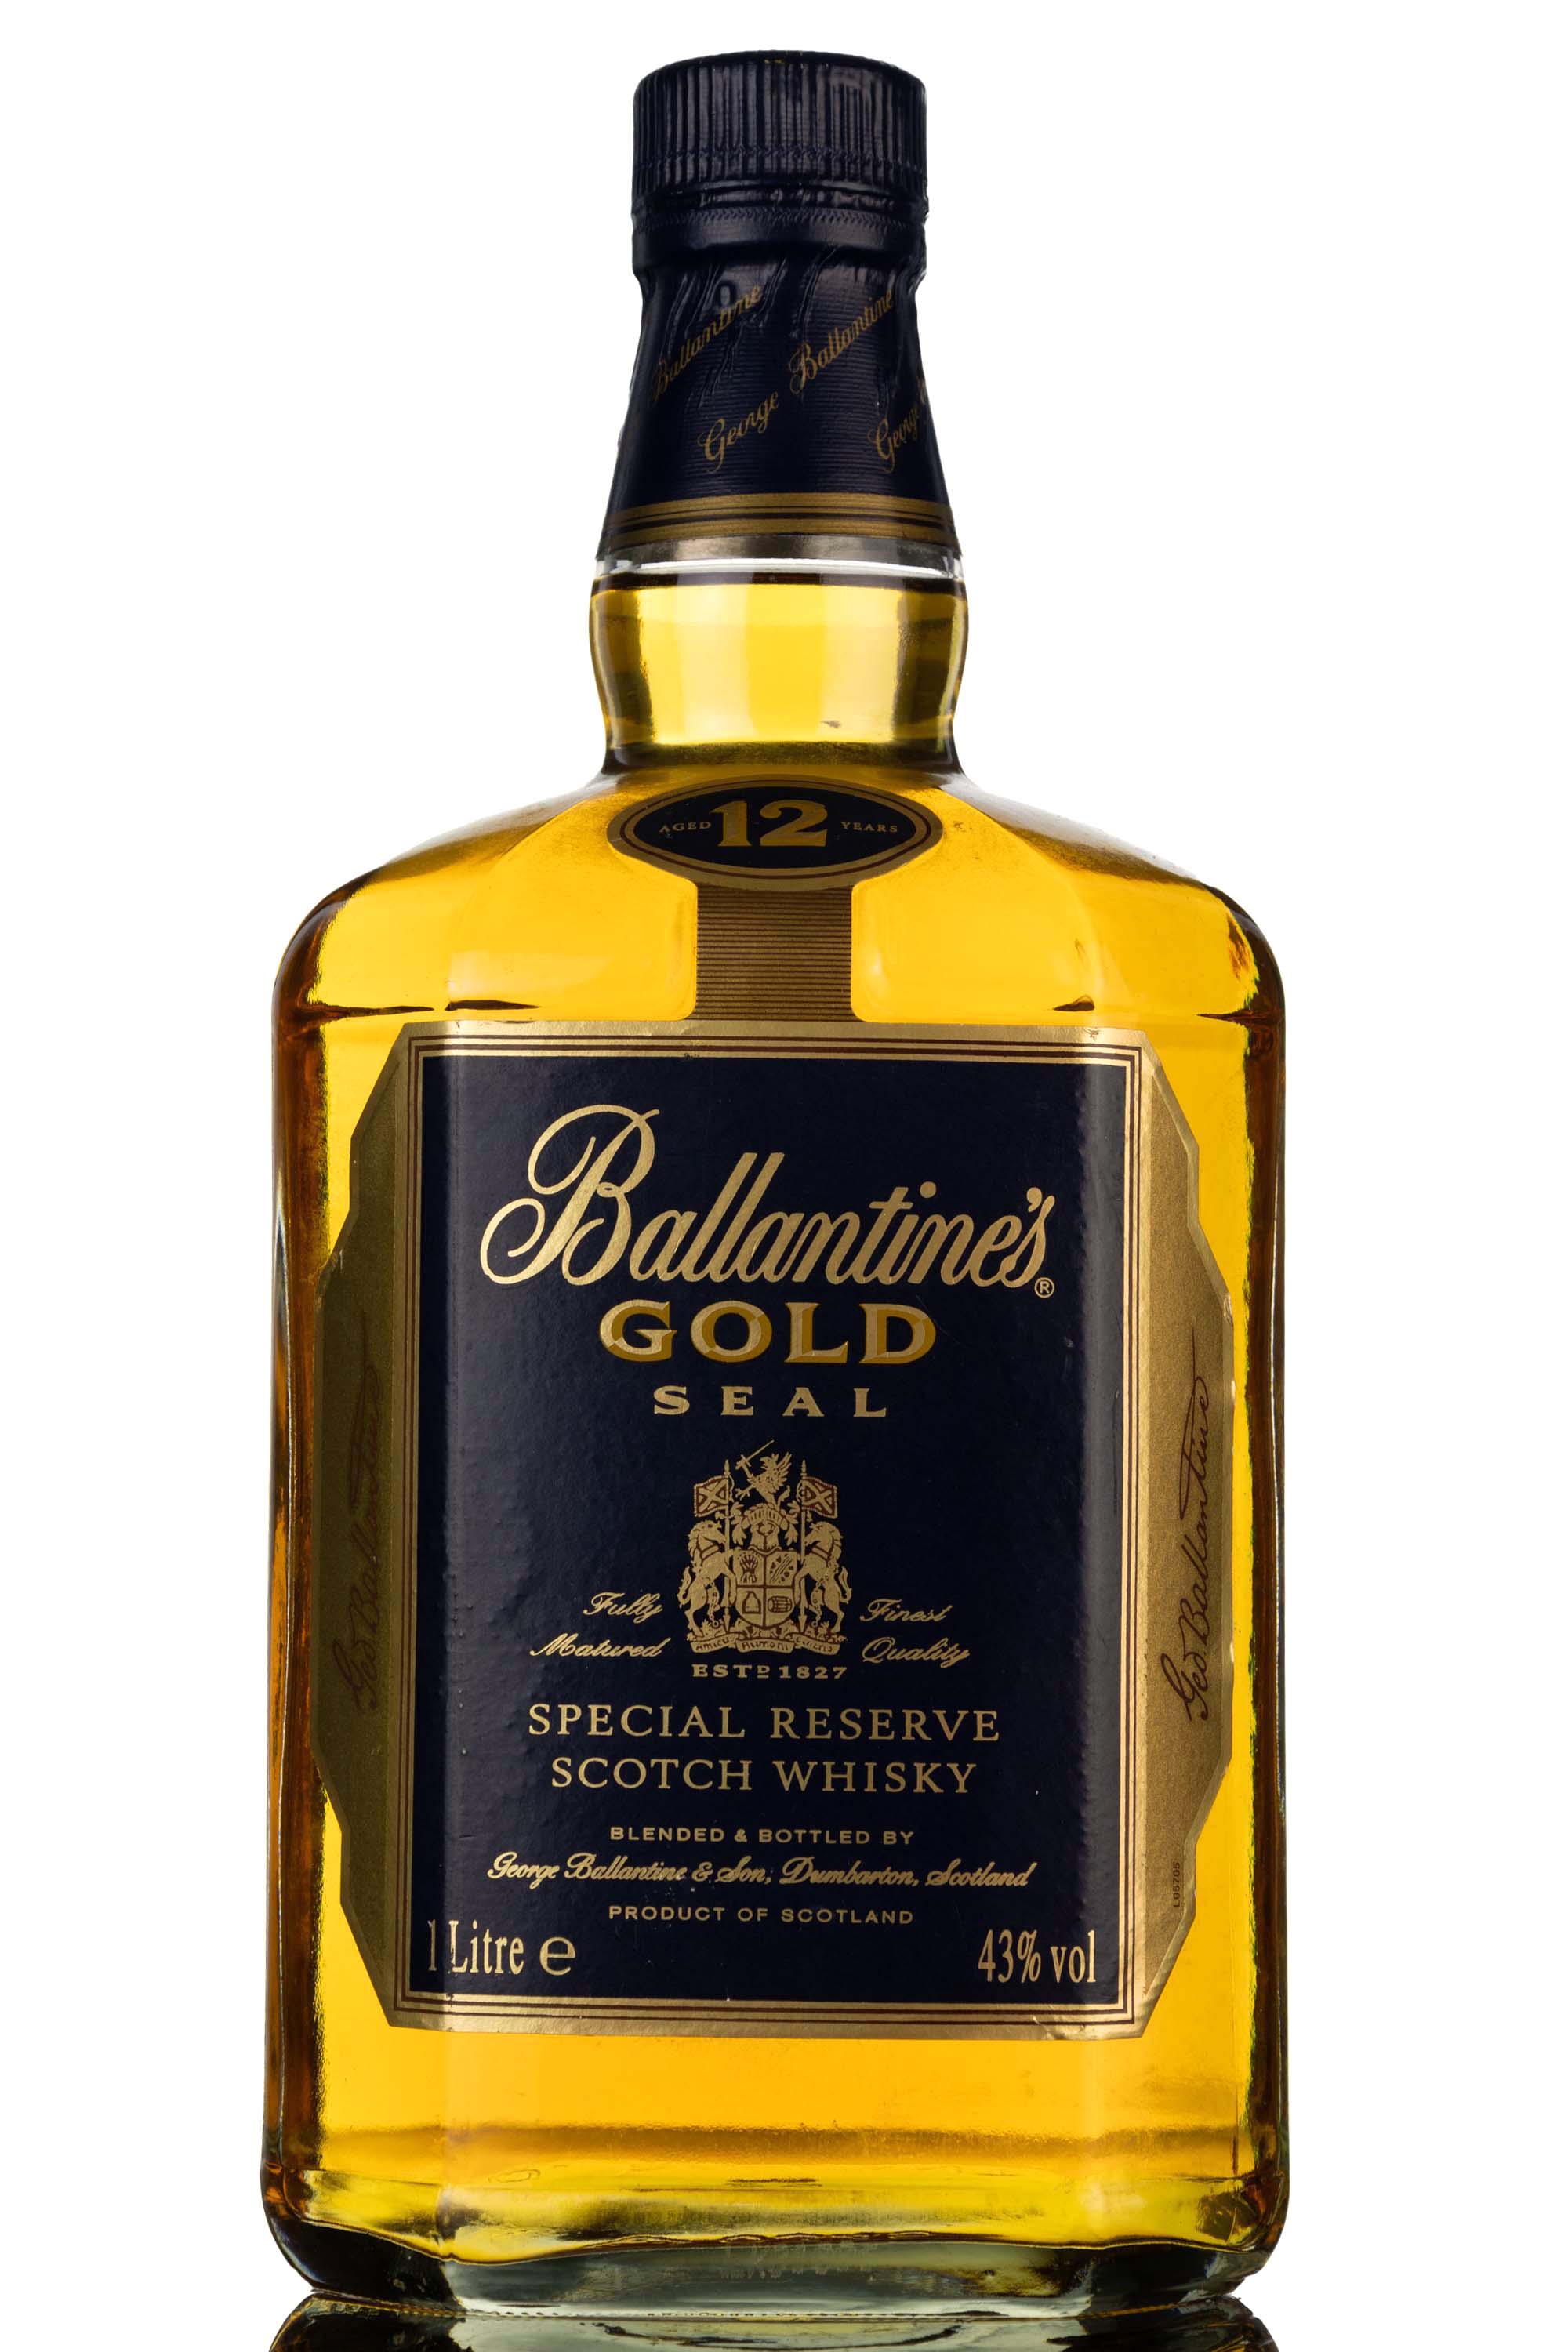 Ballantines 12 Year Old - Gold Seal Special Reserve - 1980s - 1 Litre